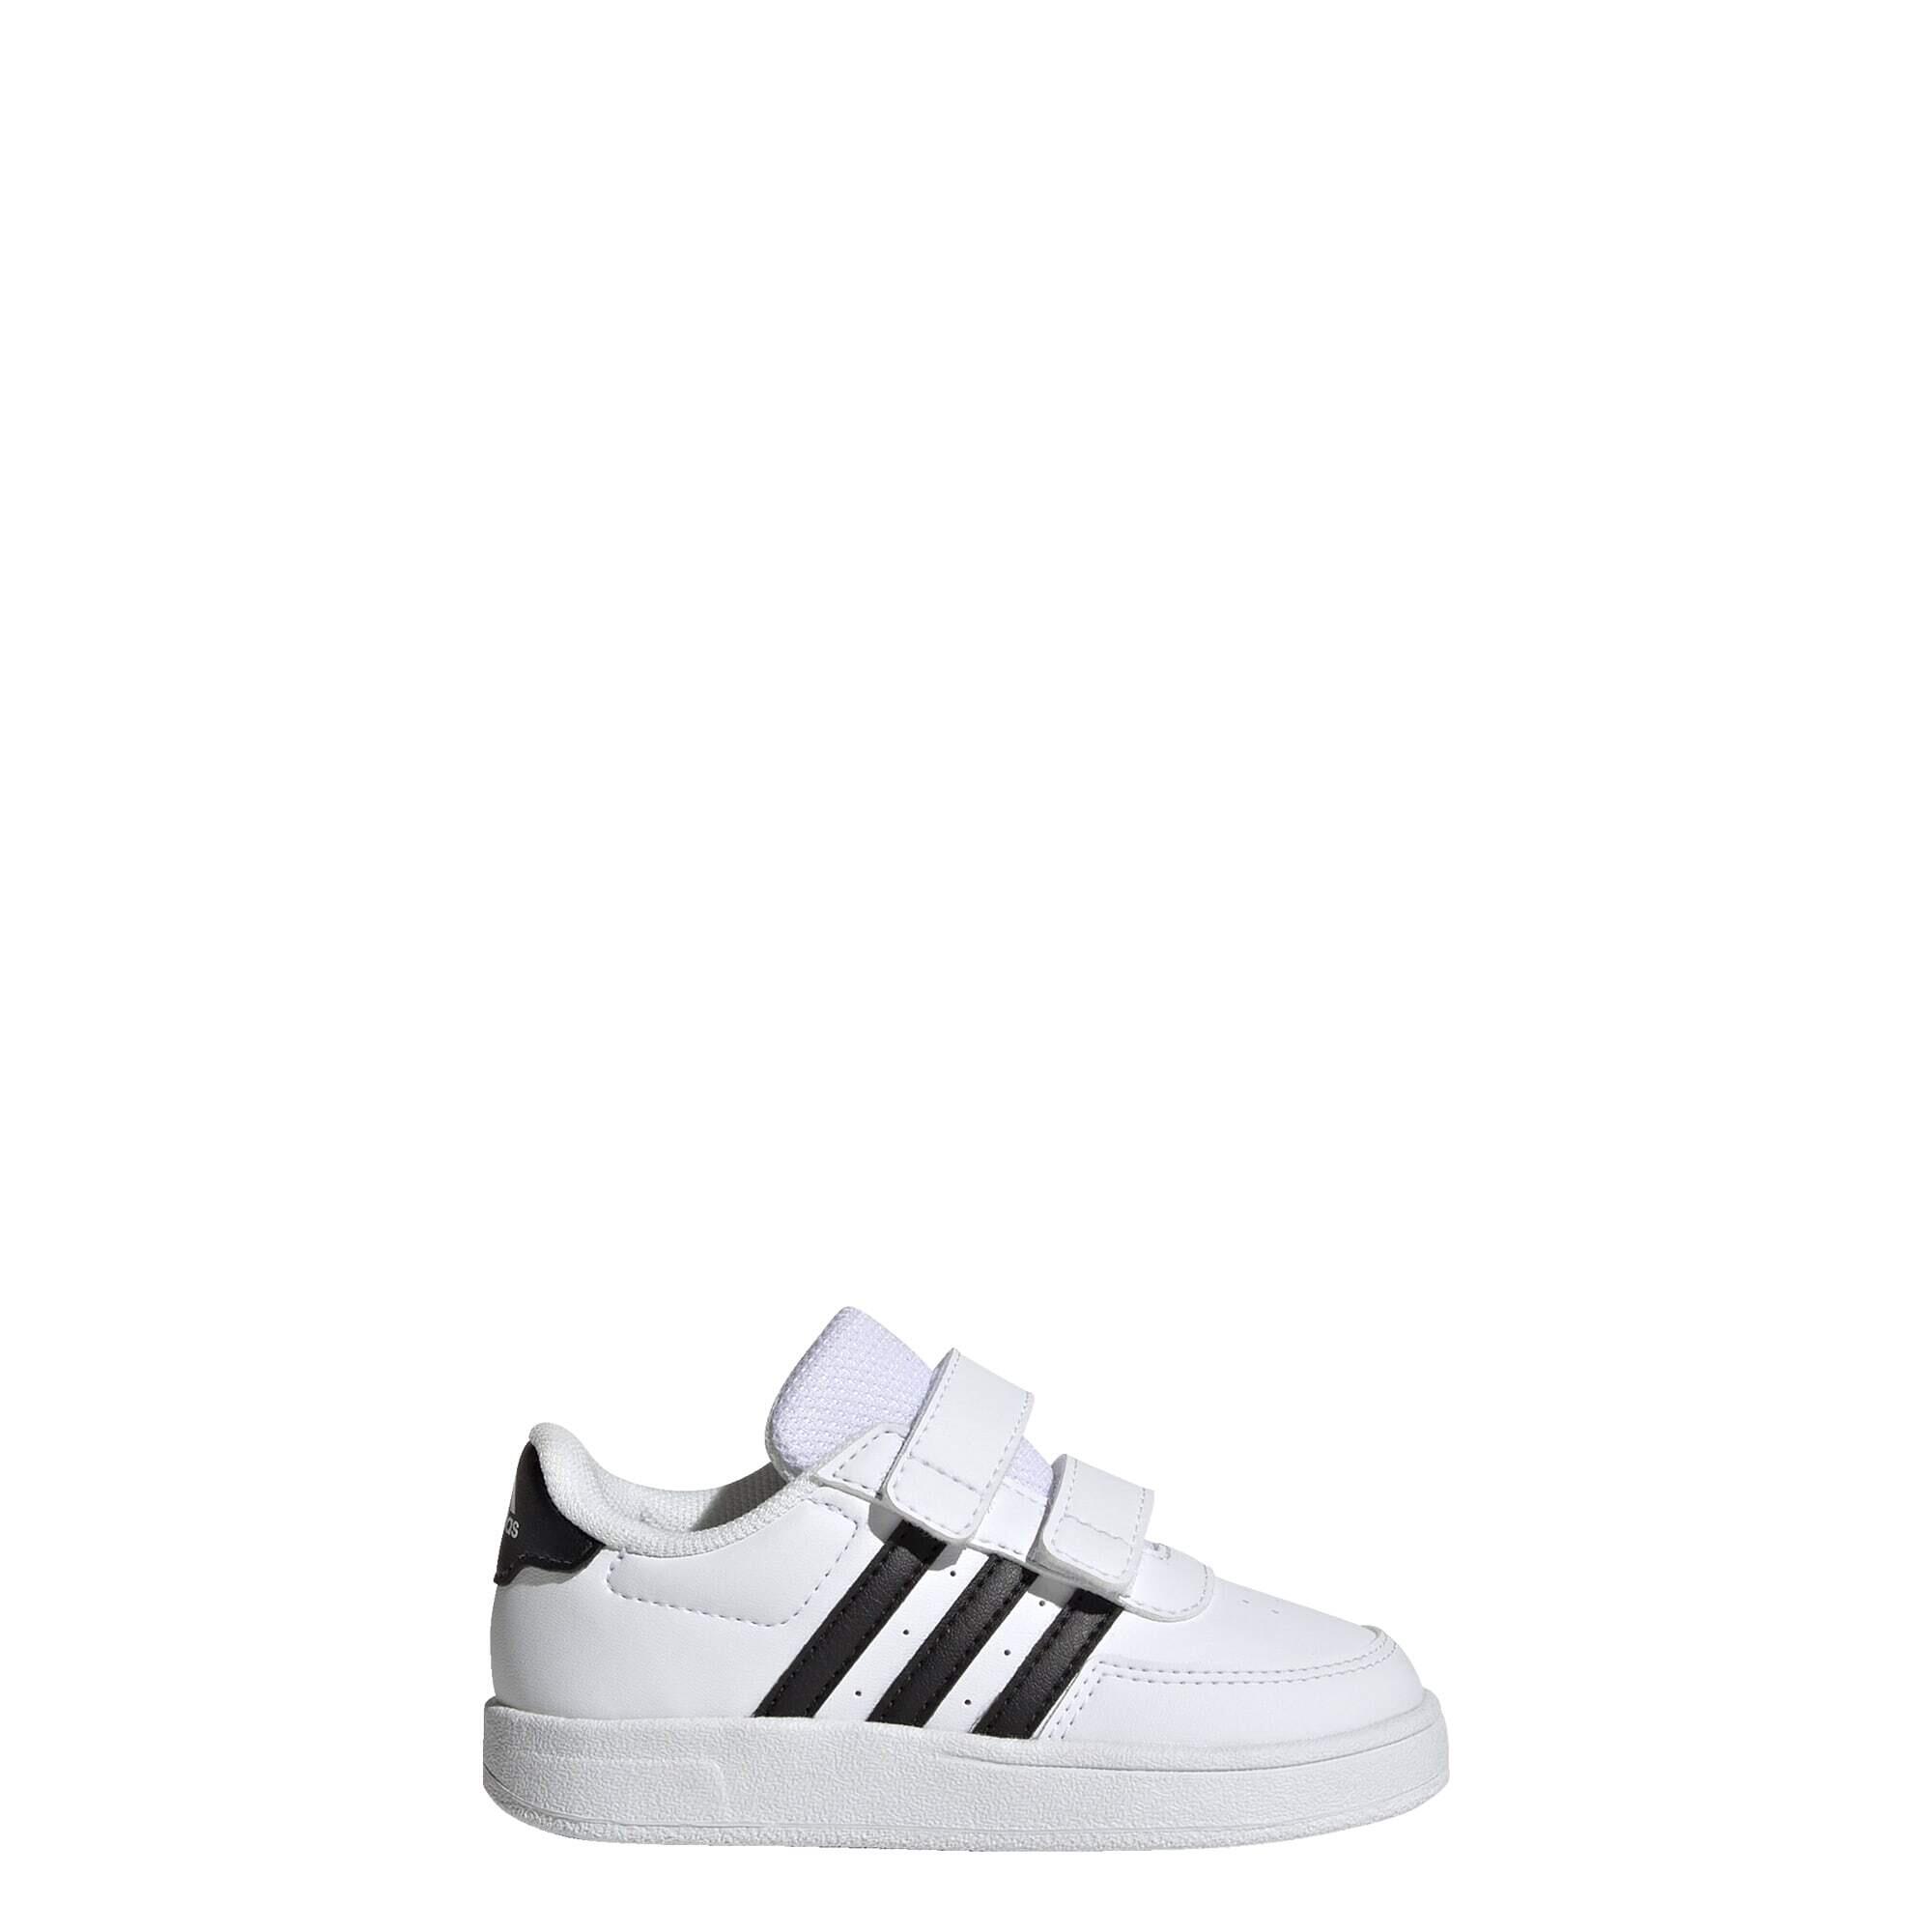 ADIDAS Breaknet Lifestyle Court Two-Strap Hook-and-Loop Shoes